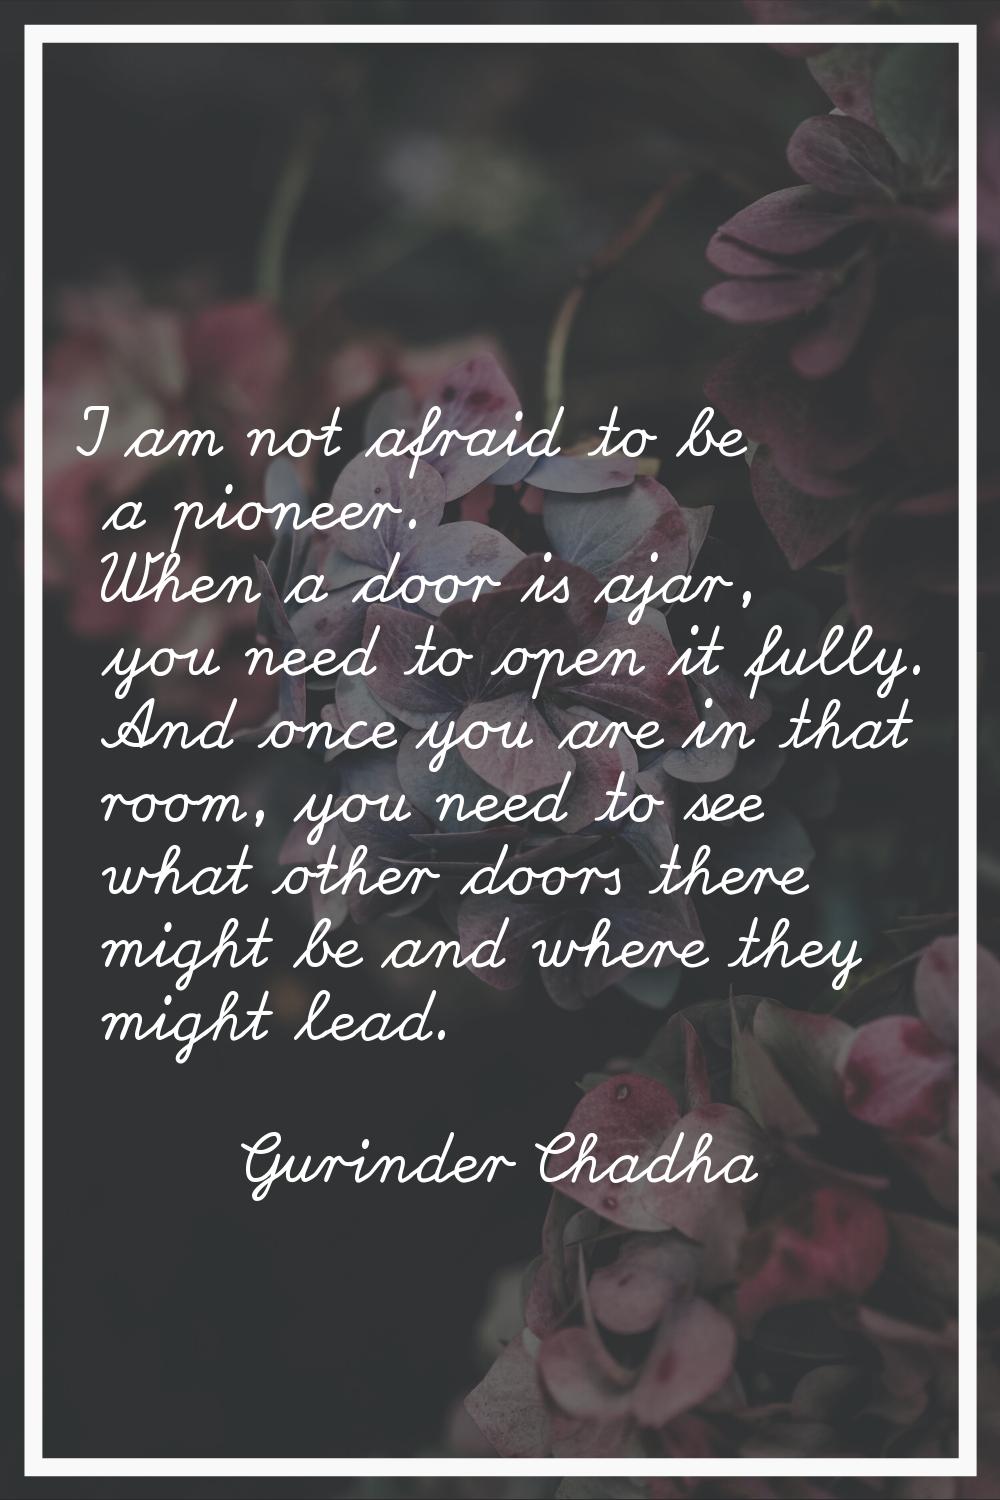 I am not afraid to be a pioneer. When a door is ajar, you need to open it fully. And once you are i